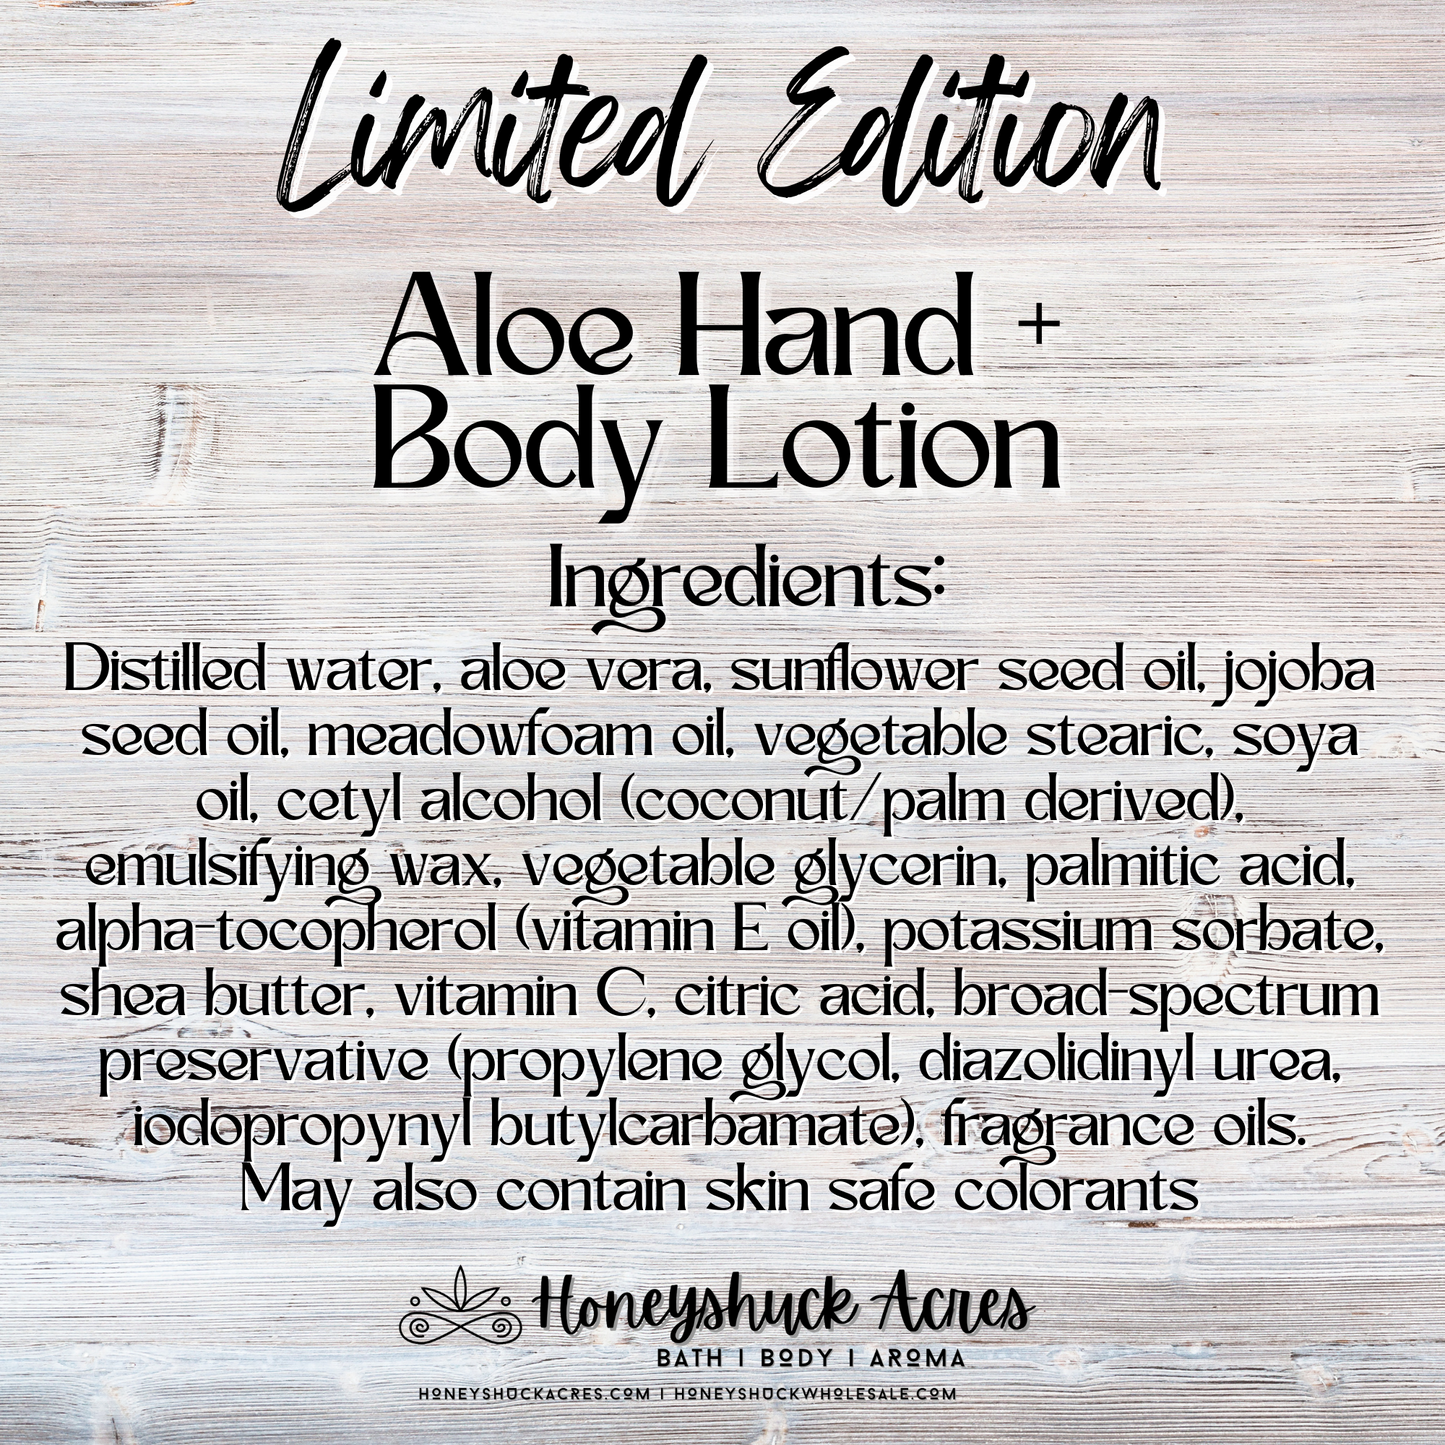 Limited Edition Aloe Hand + Body Lotion | Rosewood + Black Amber